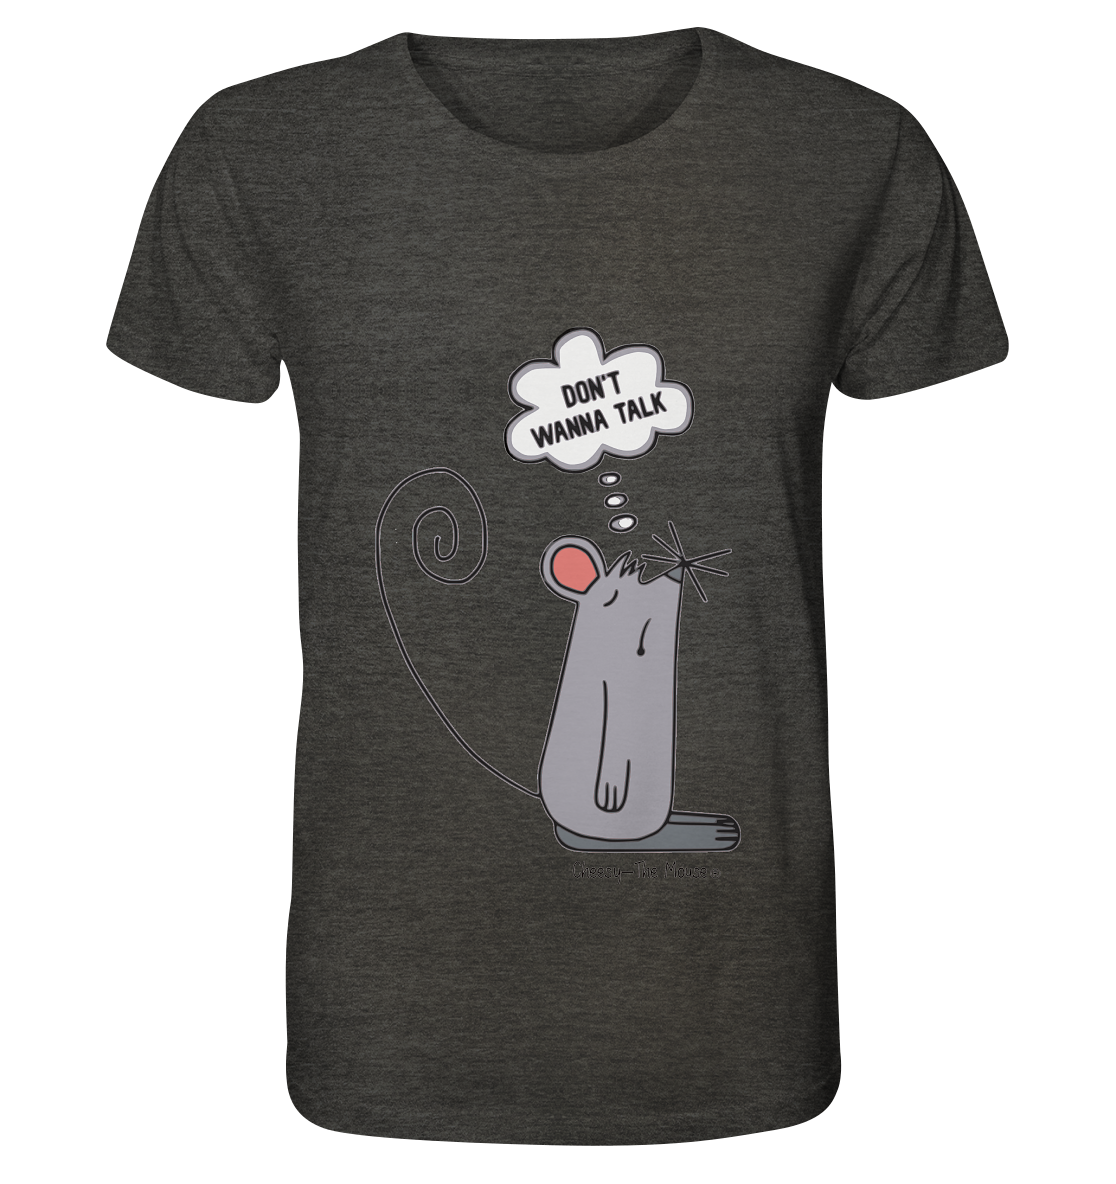 Cheesy The Mouse - Organic Shirt (meliert)